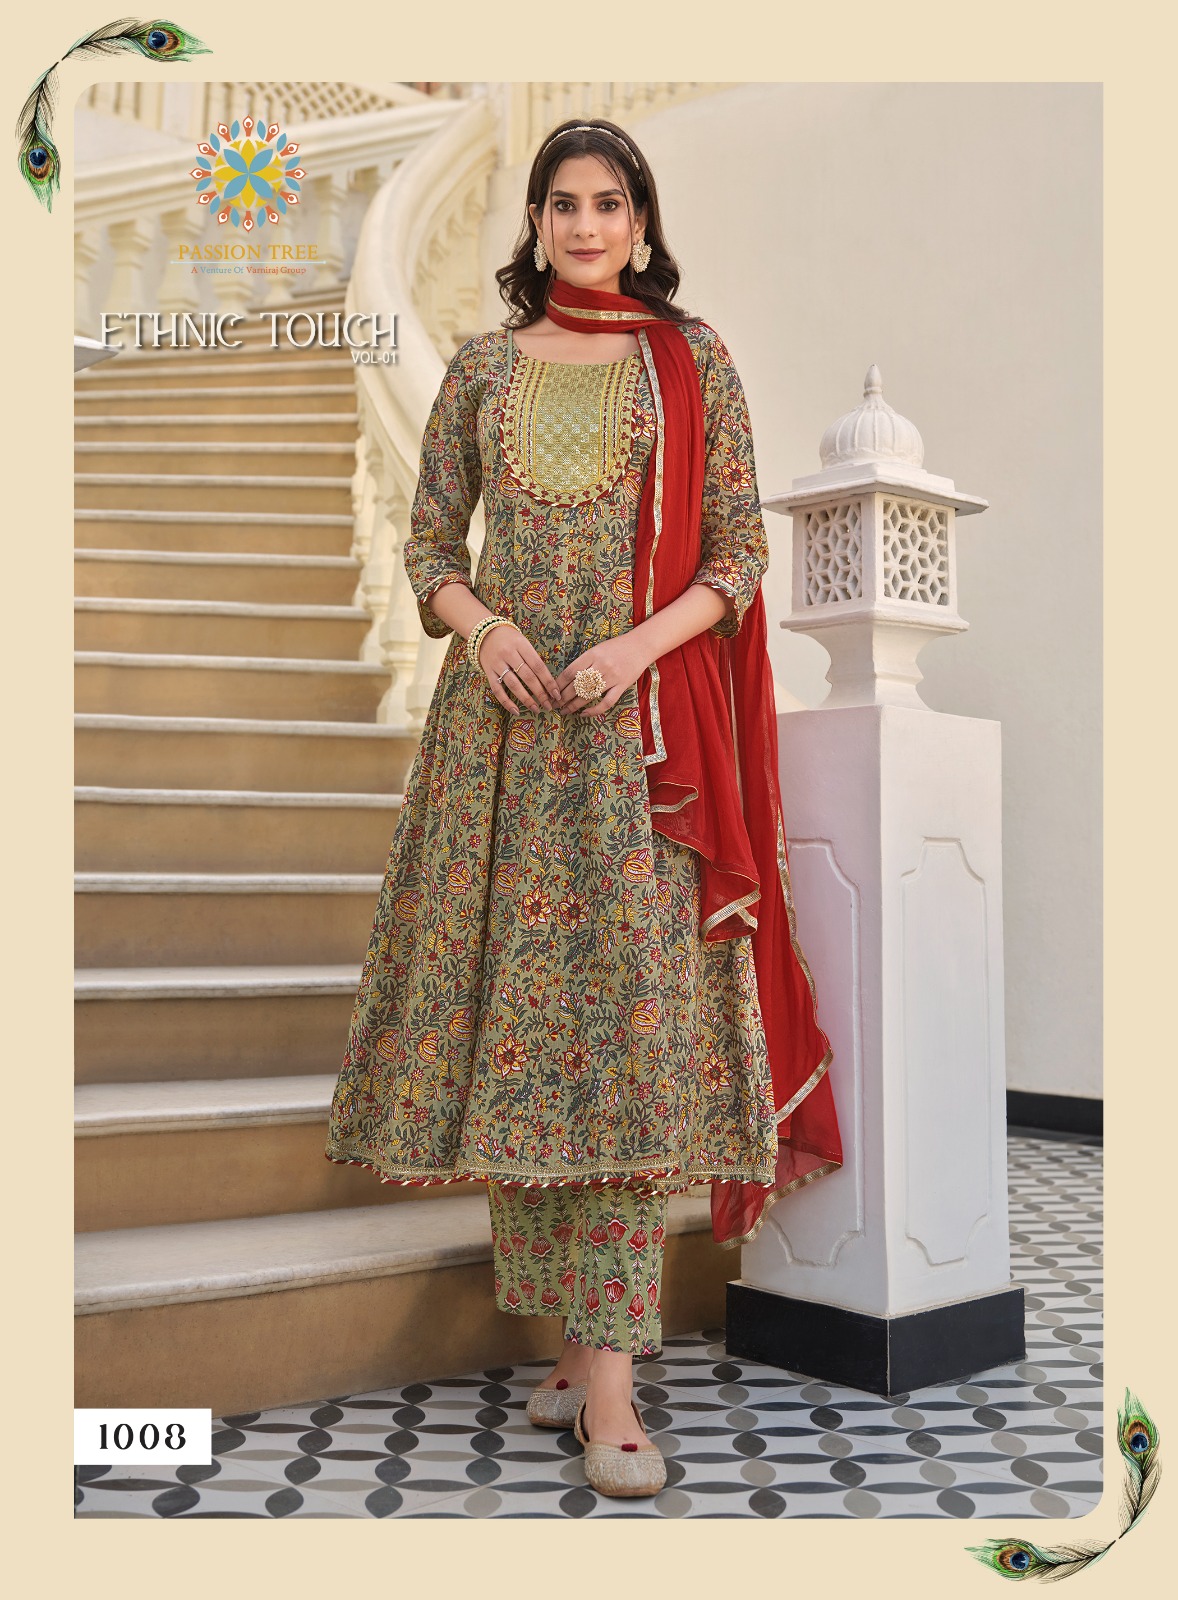 Passion Tree Ethnic Touch Vol 1 collection 7